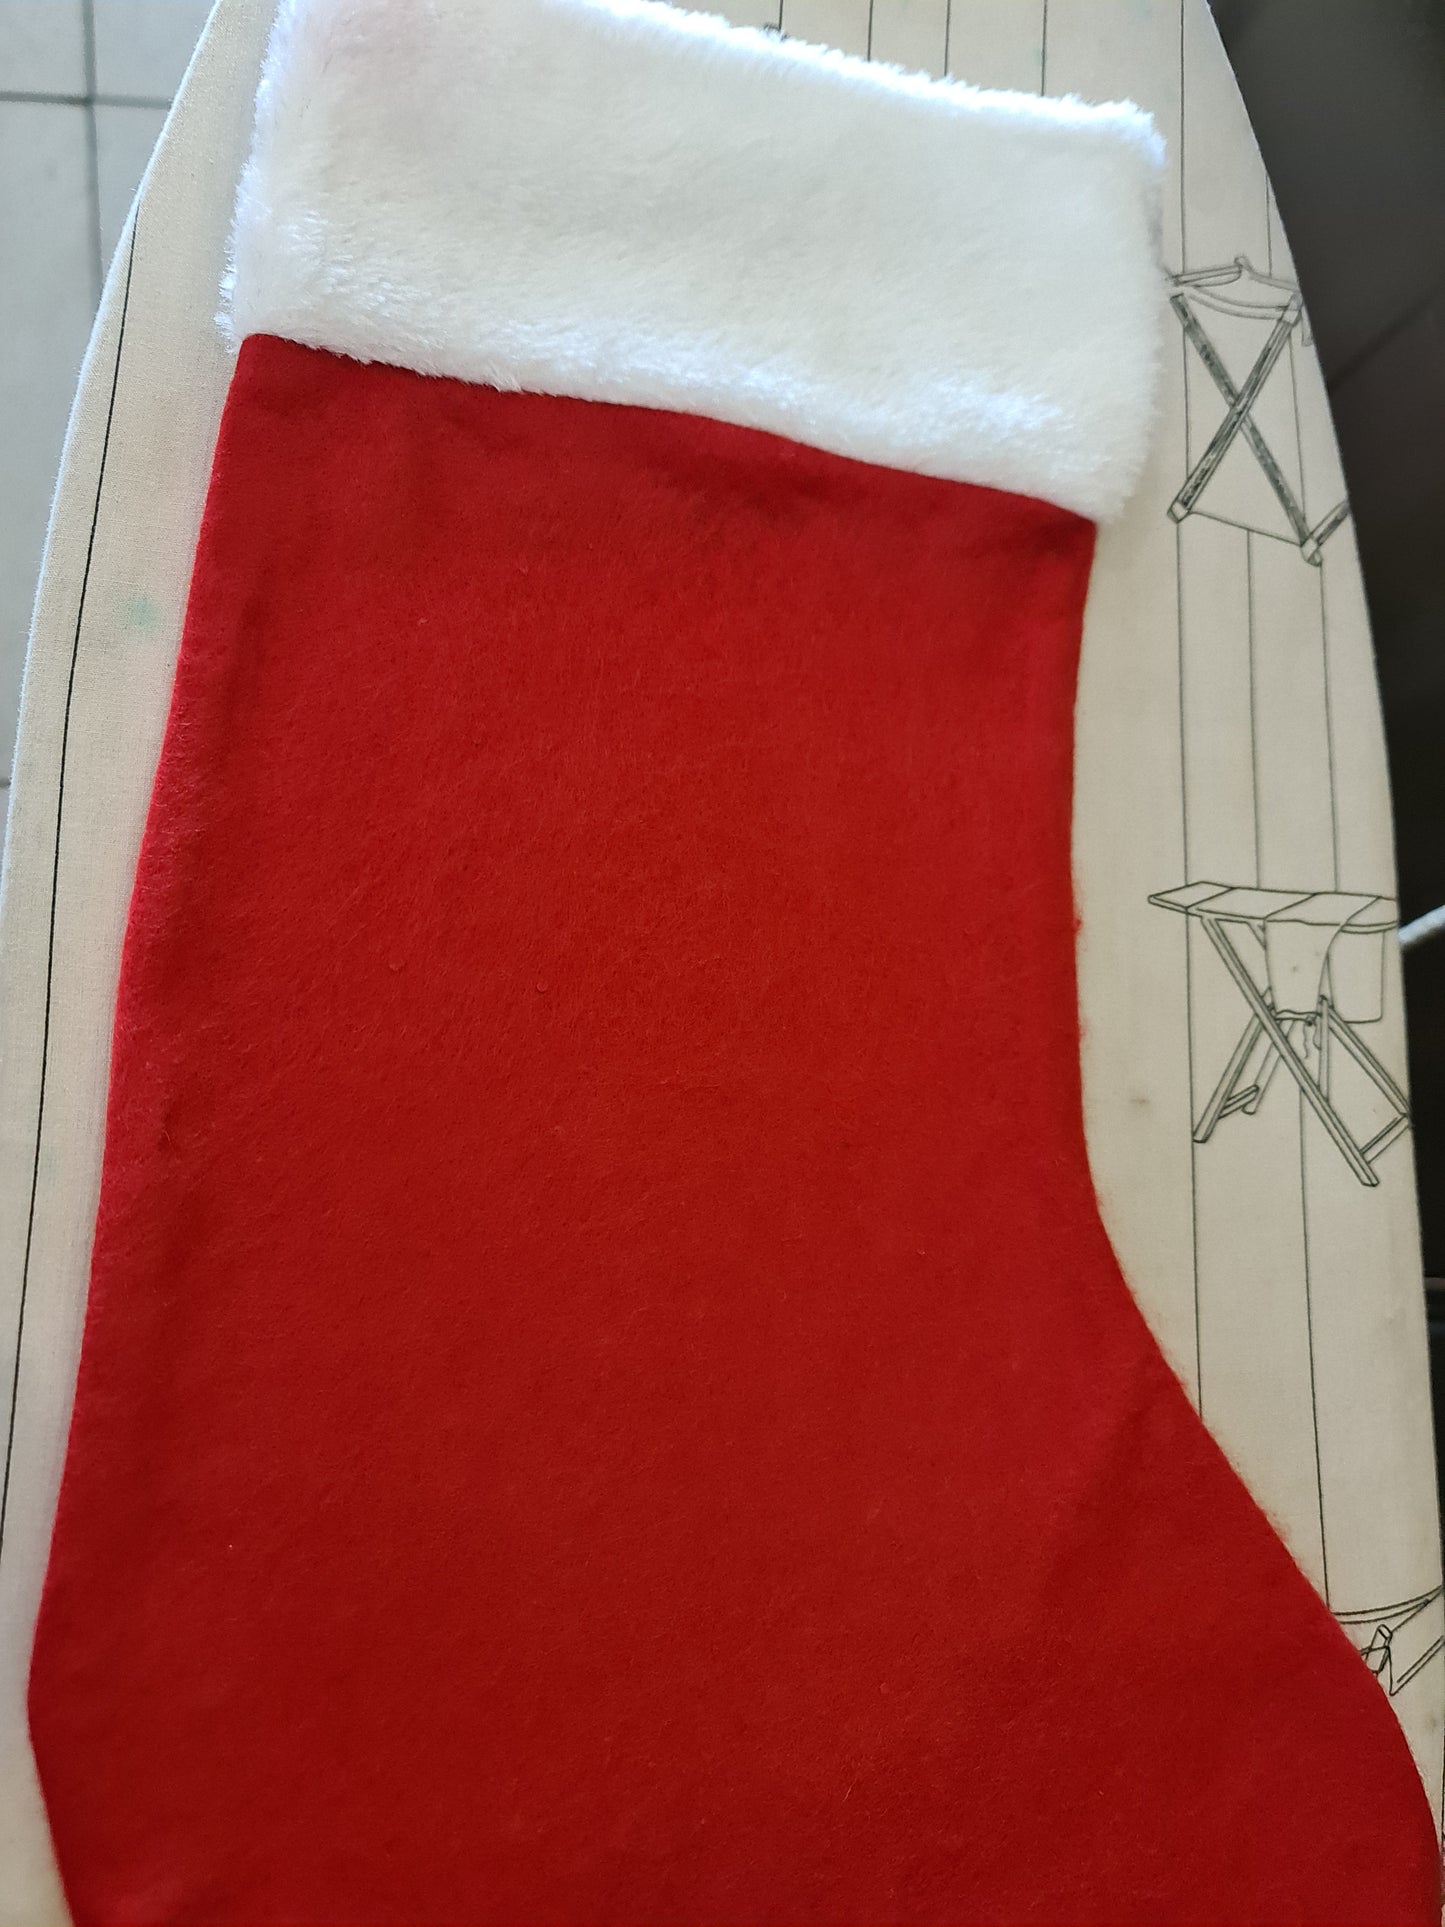 Do it yourself DIY heat vinyl decals for Christmas hats, stockings, or any fabric.